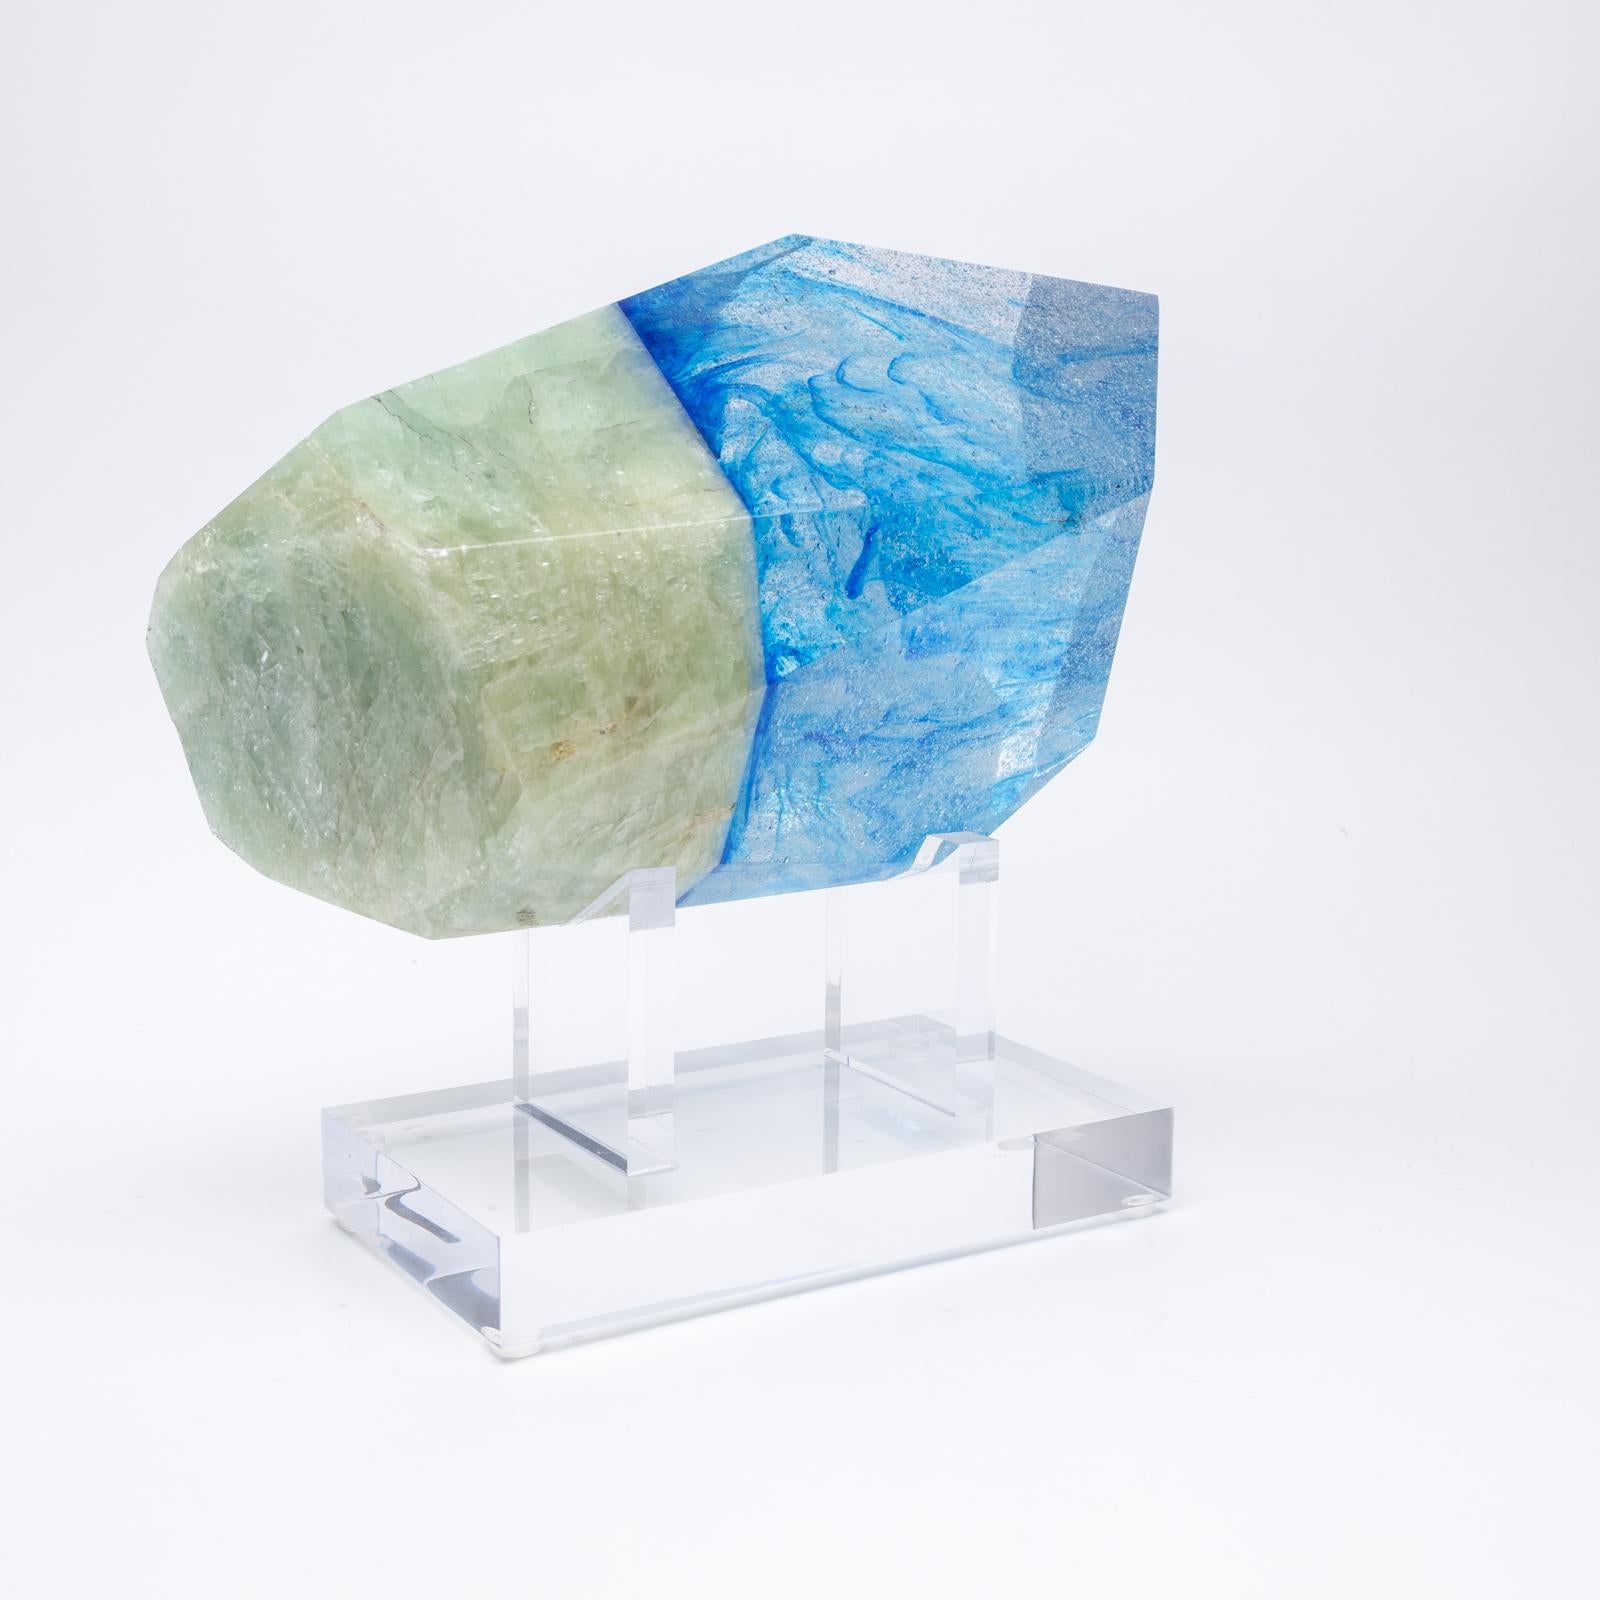 Paired, Brazilian aquamarine and glass sculpture from TYME collection, a collaboration by Orfeo Quagliata and Ernesto Durán

TYME collection 
A dance between purity and detail bring a creation of unique pieces merging nature’s gems and human